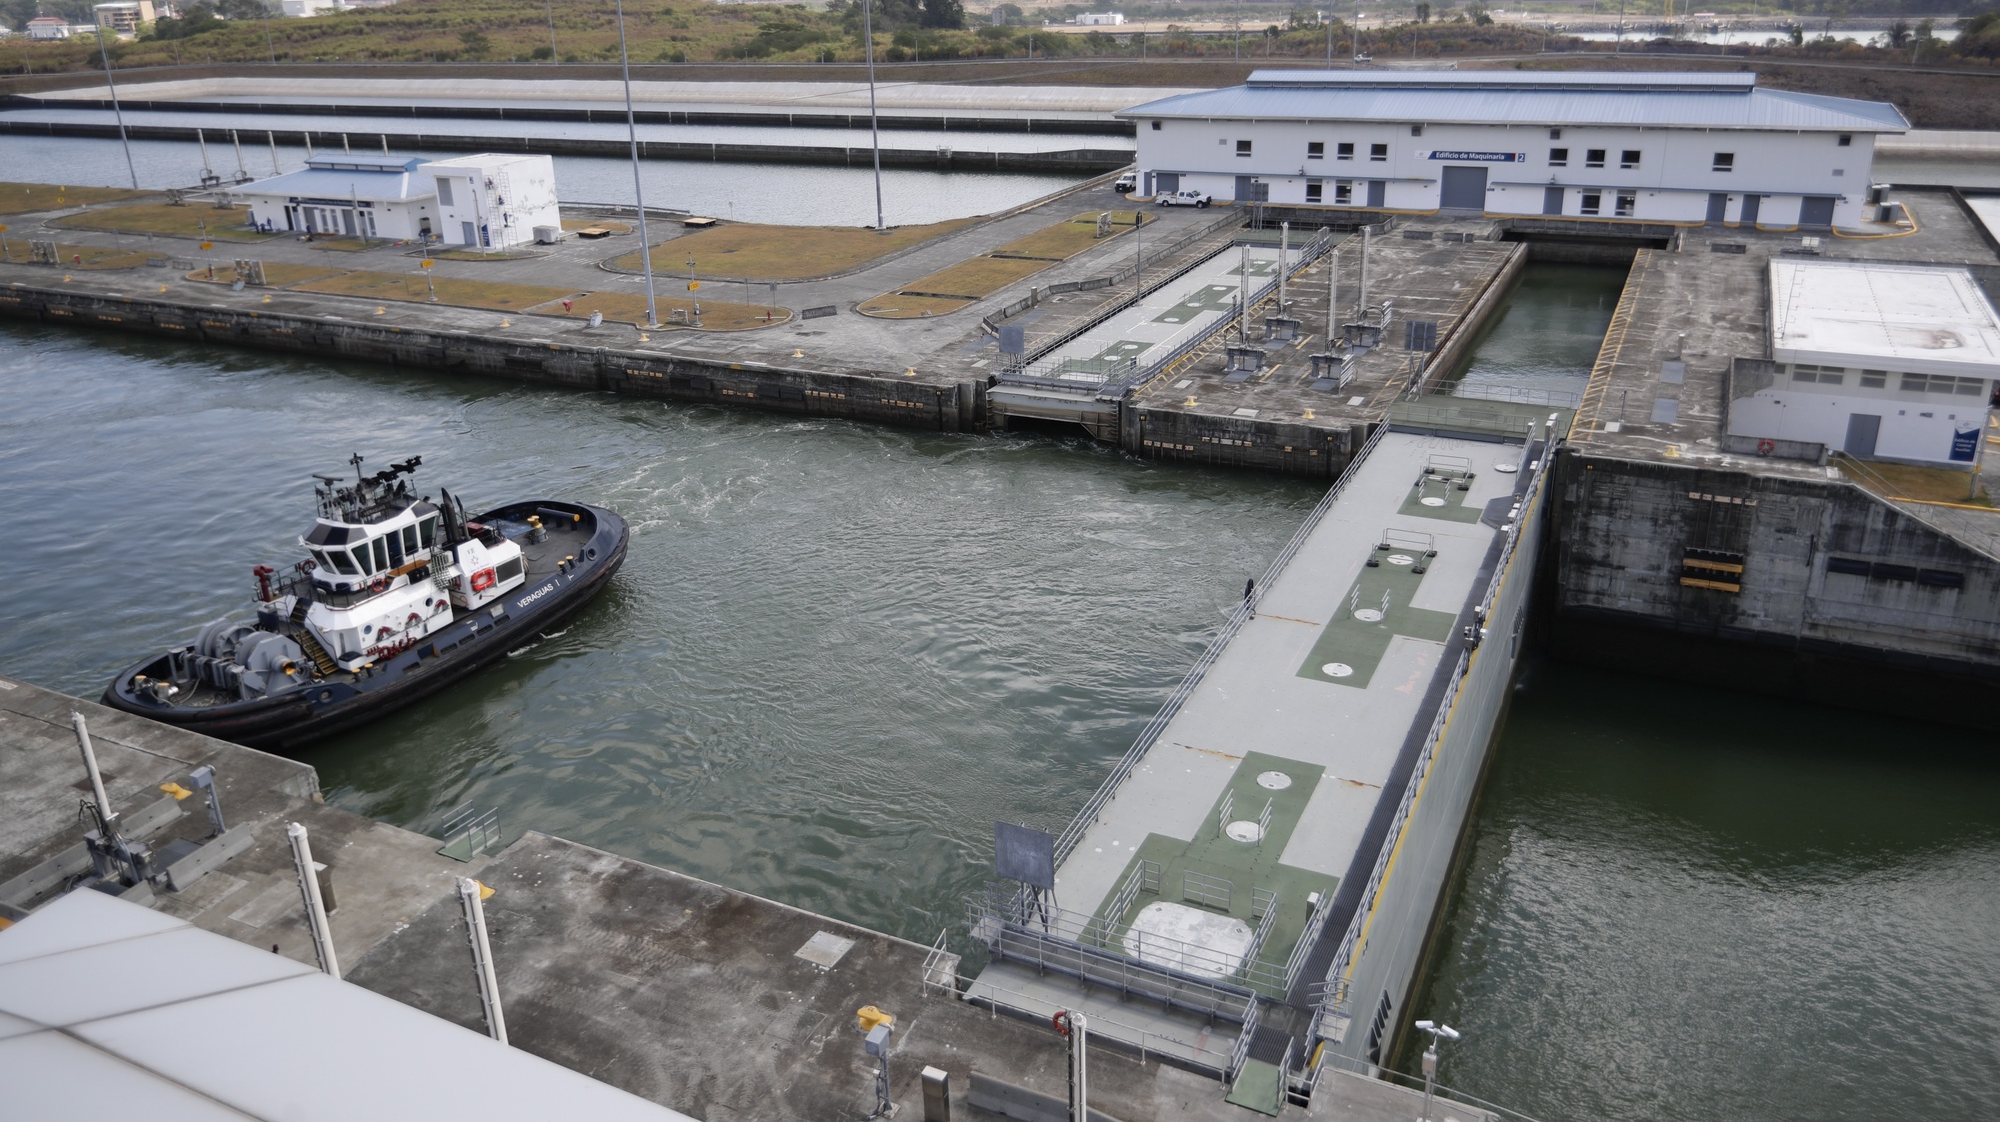 epa10580737 A tugboat maneuvers at the Cocoli locks, inaugurated in 2016, on the Panama Canal in Panama City, Panama, 19 April 2023. The Panama Canal implements from 19 April 2023 its fifth draft restriction for this season on neopanamx ships that only pass through the Panama Canal expansion inaugurated in 2016, due to the low level of at least one of the two artificial lakes that feed the channel as a result of the country&#039;s dry season. Neopanamax ships are three times the size of the vessels that pass through the Panama Canal century-old locks.  EPA/Bienvenido Velasco